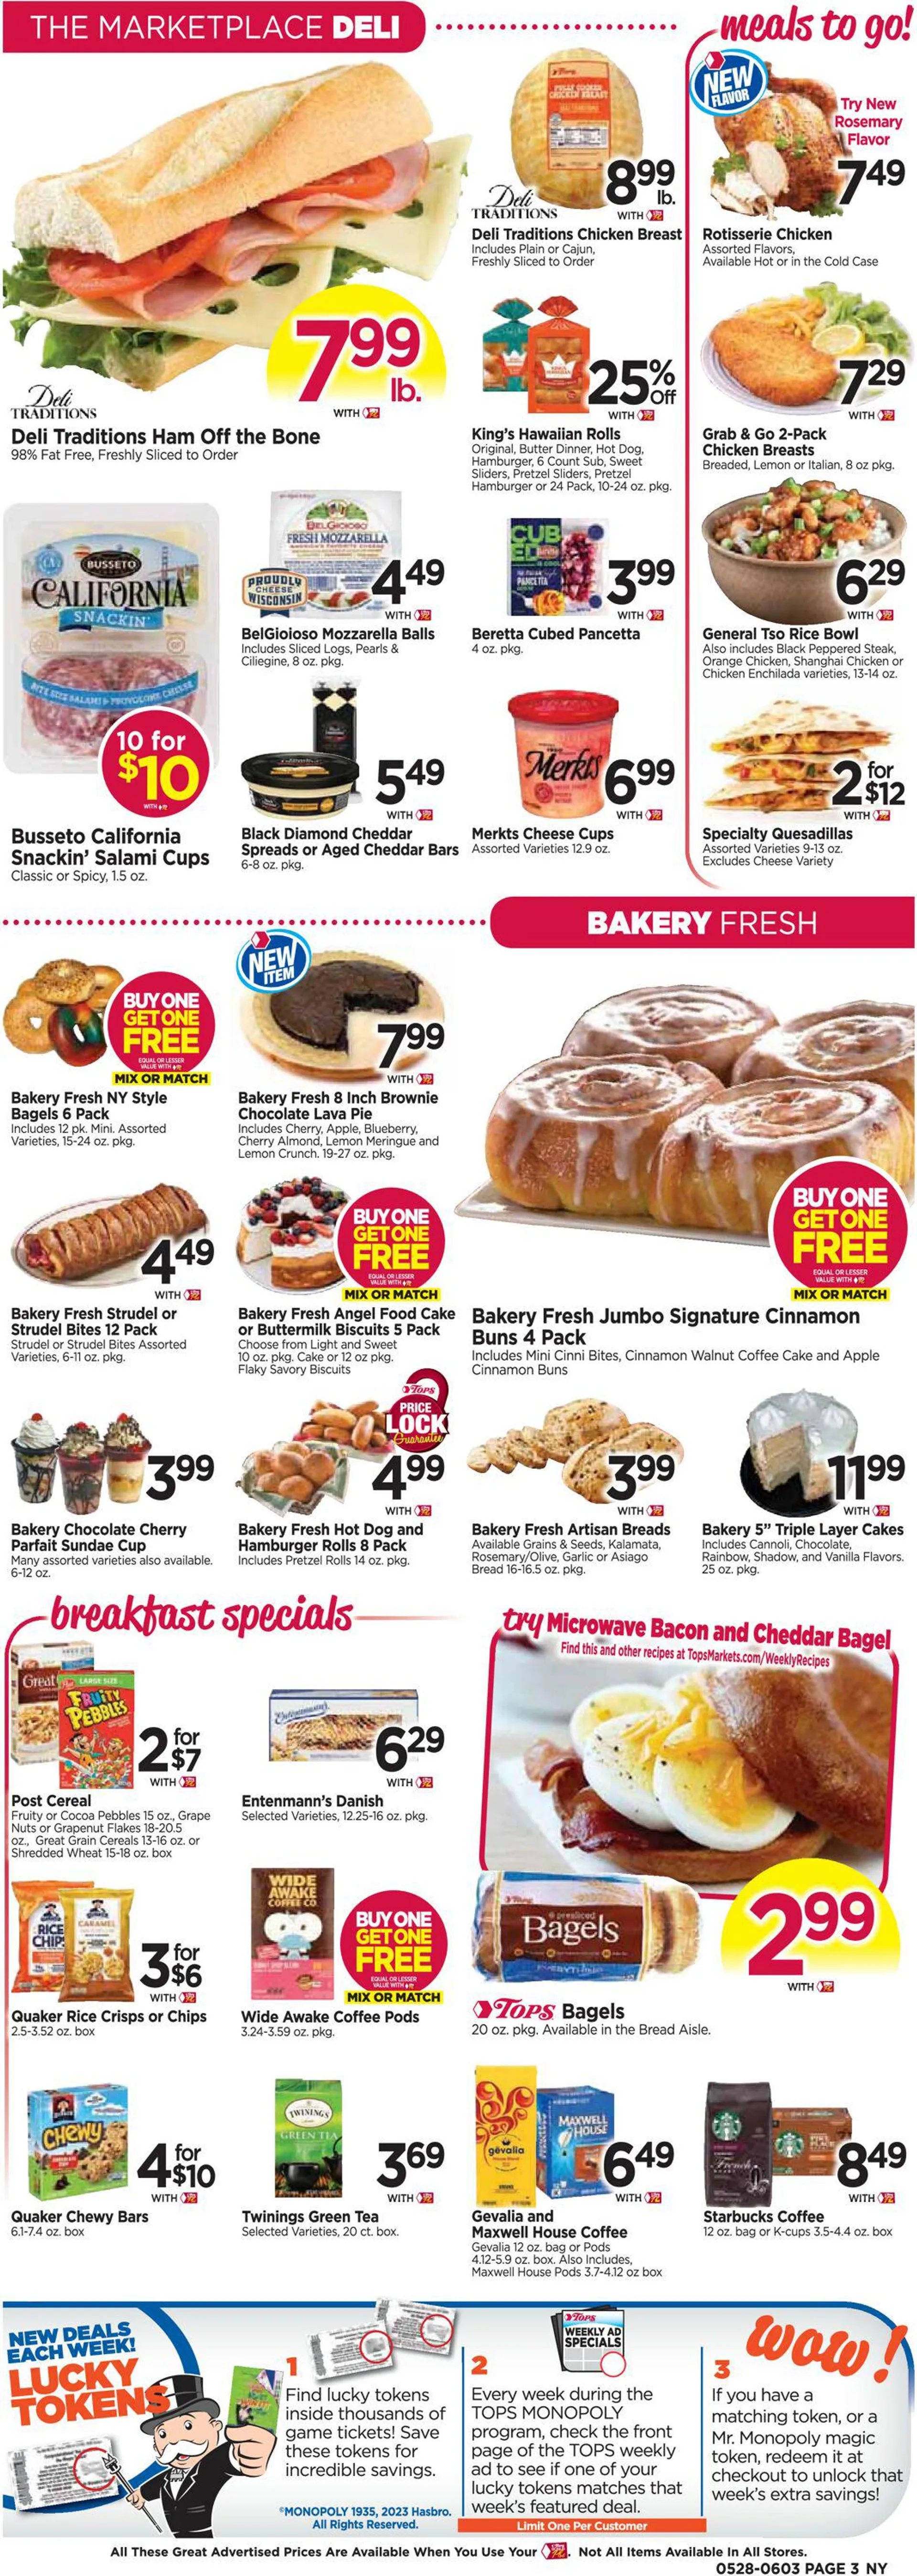 Tops Friendly Markets Current weekly ad - 3